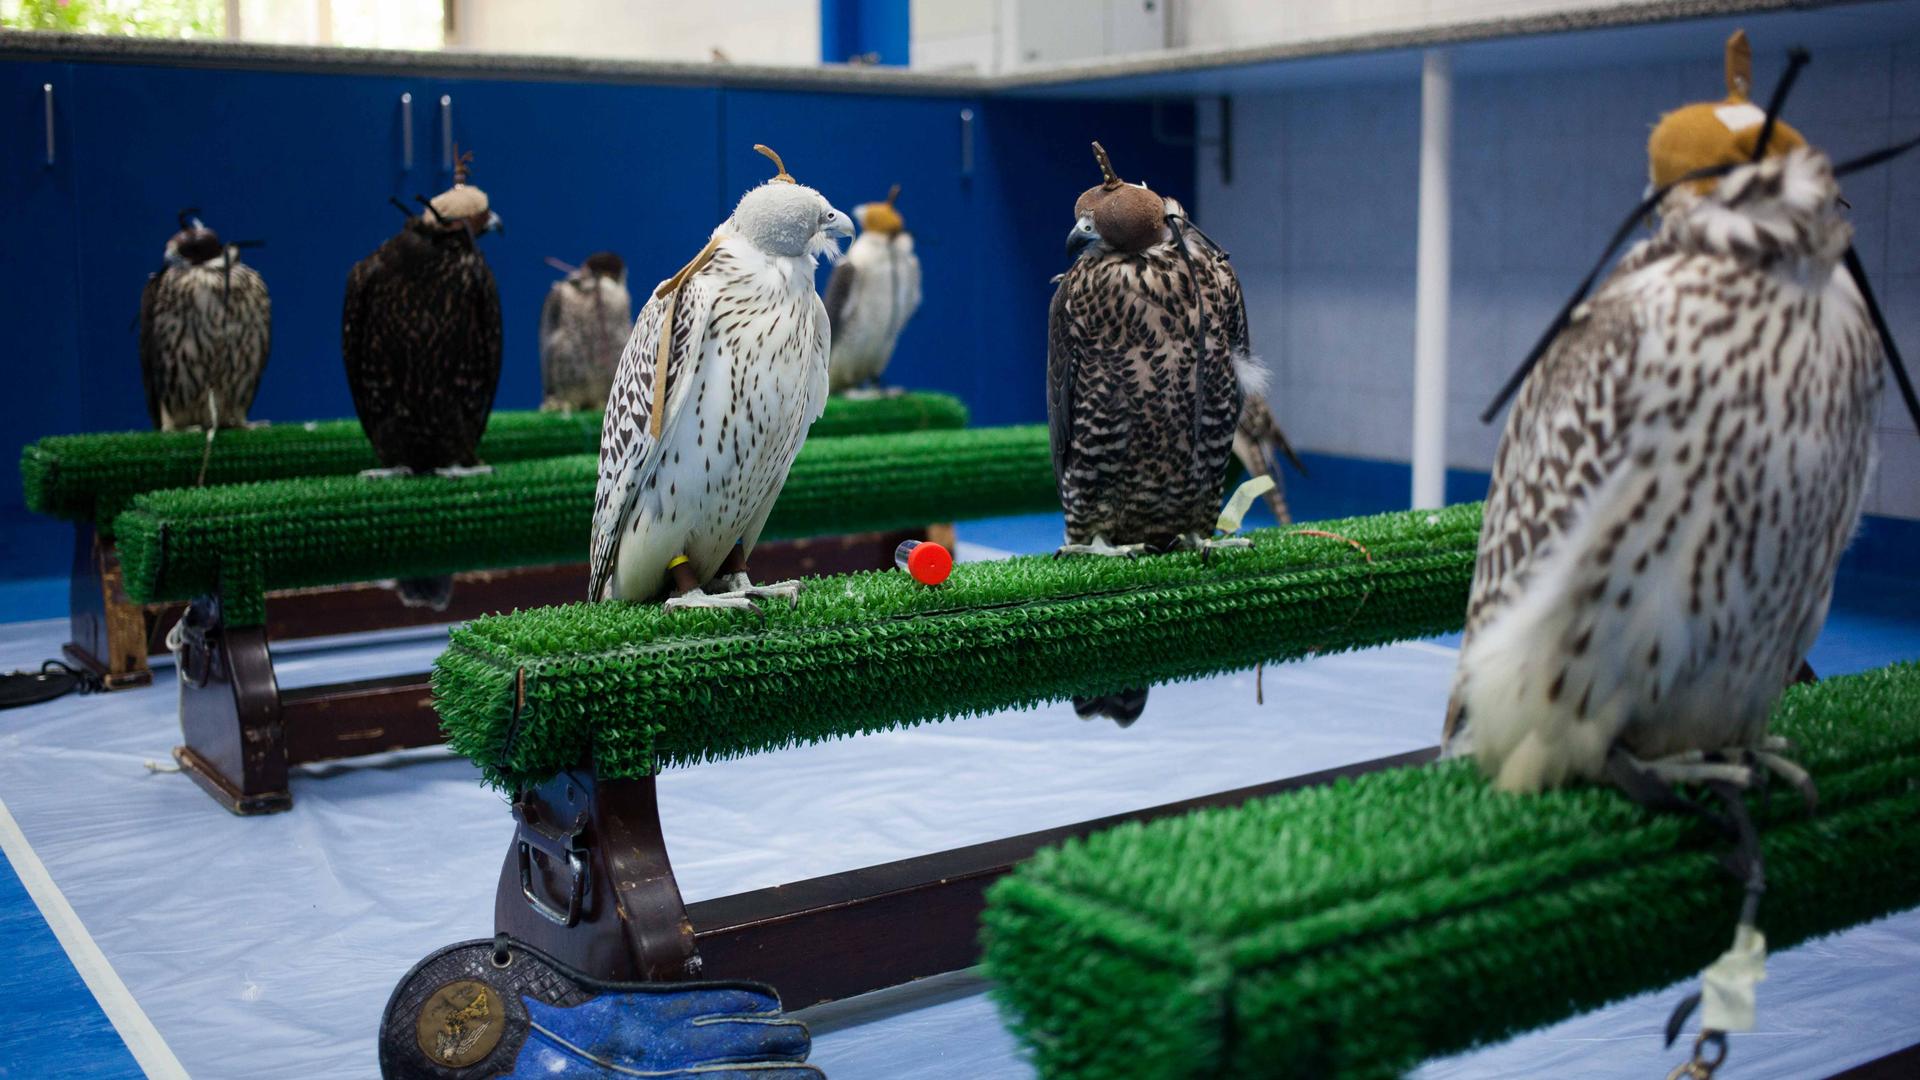 Falcons await treatment at the Abu Dhabi Falcon Hospital. Their eyes are covered to keep them calm.